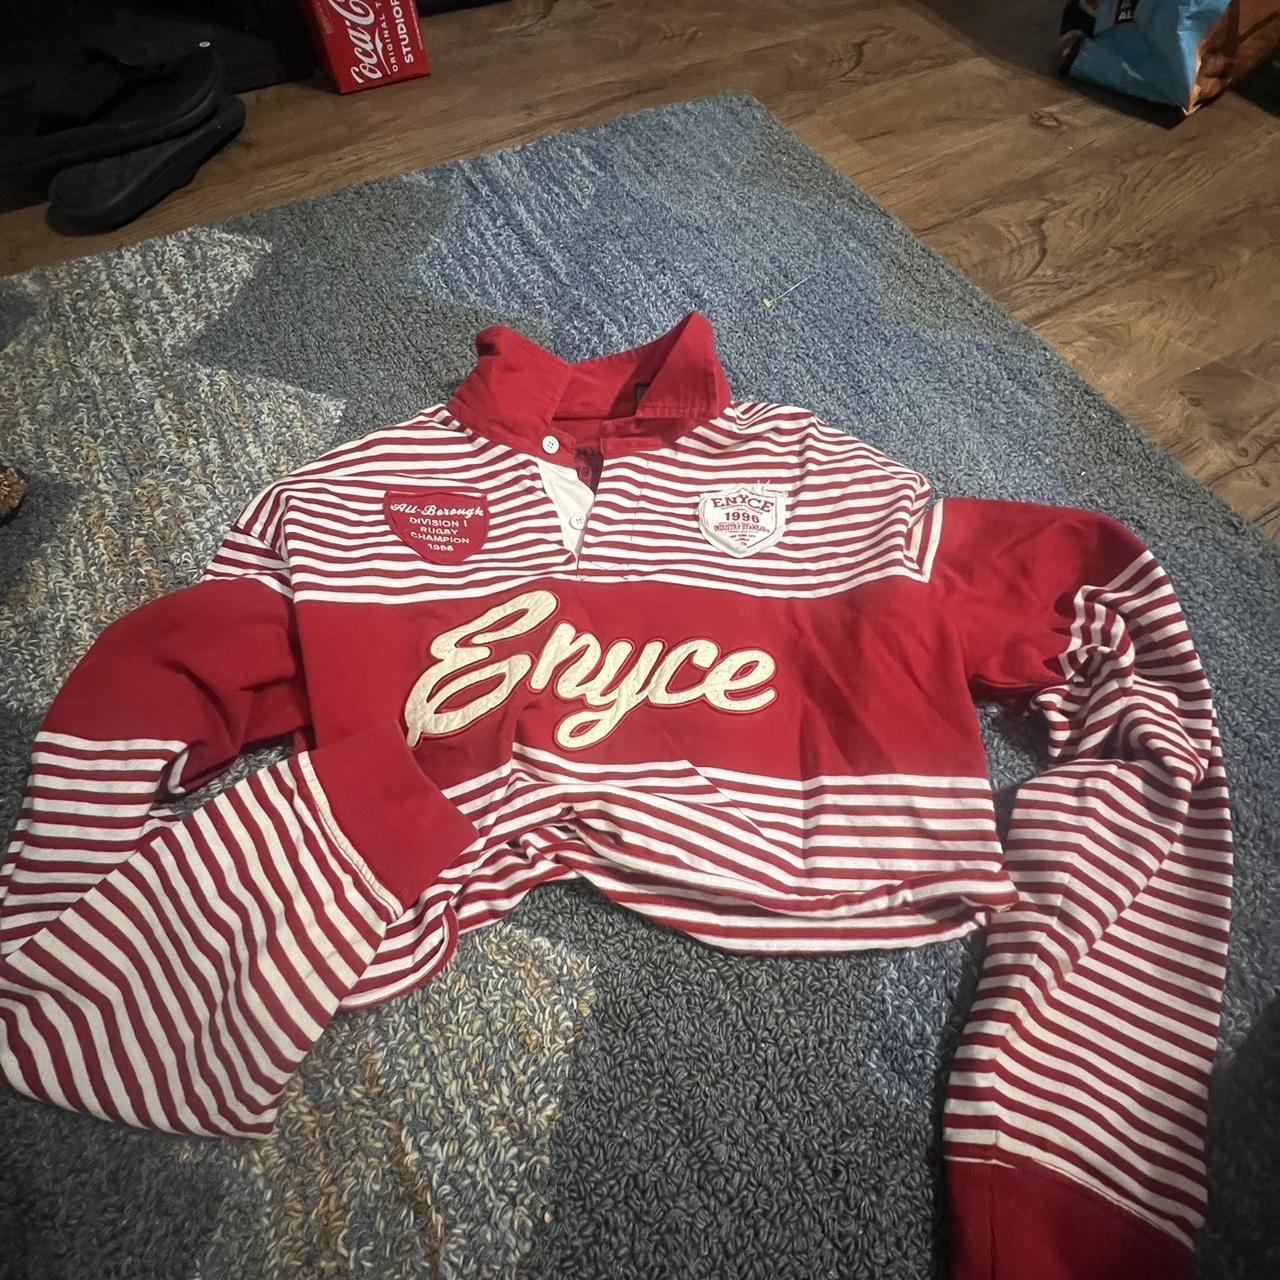 enyce super thick material cropped myself 1996 vintage - Depop